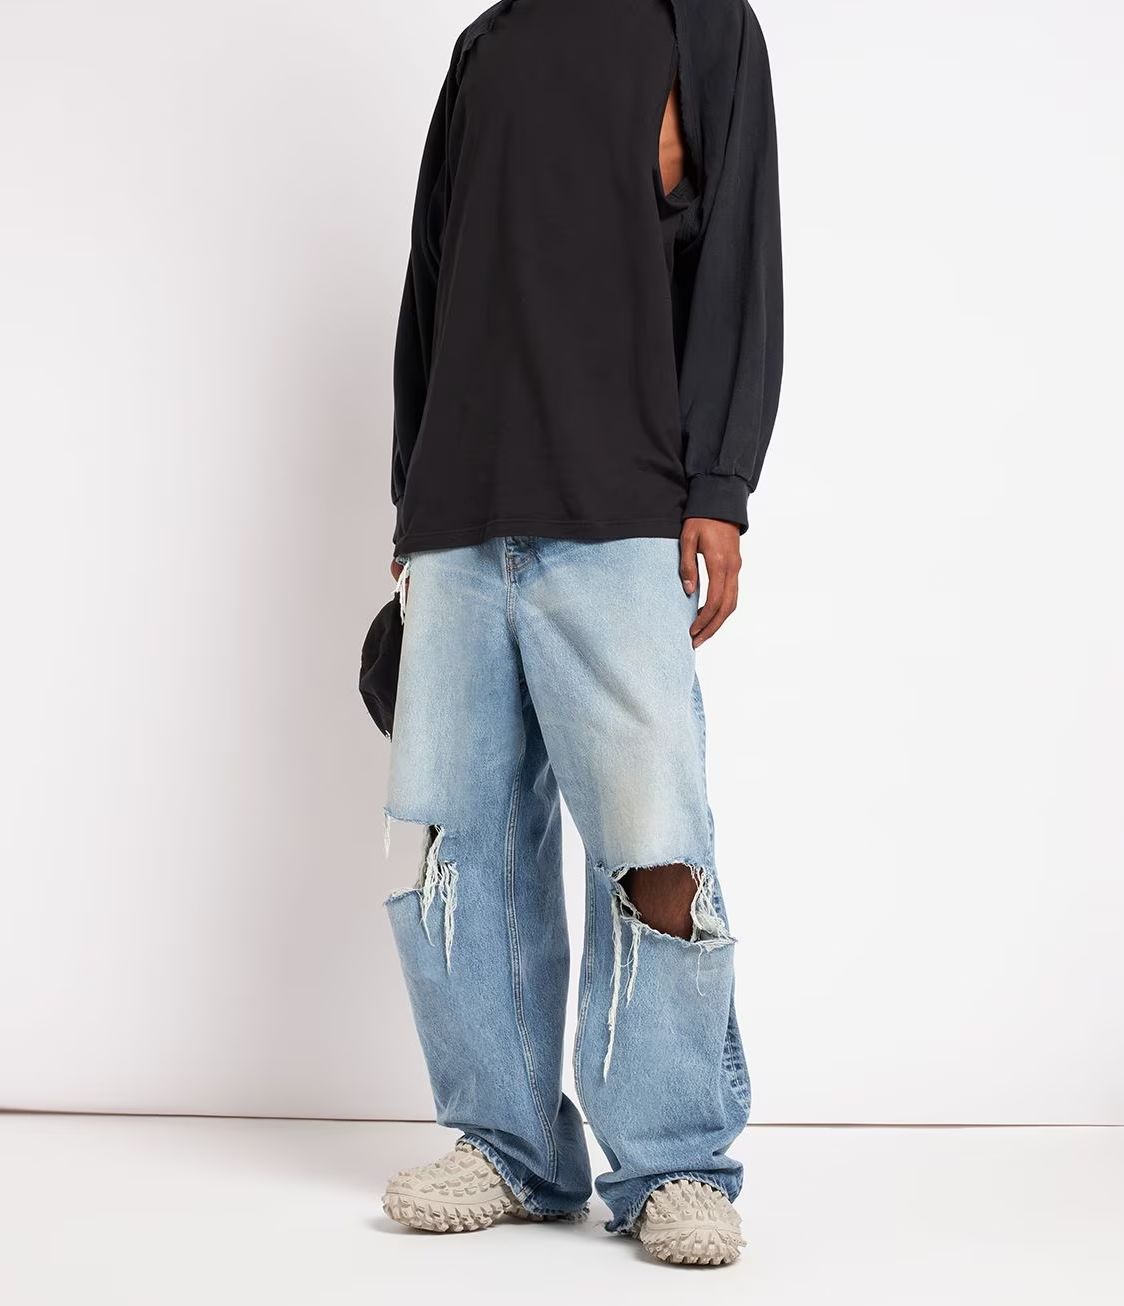 Definition & Meaning of Baggy pants